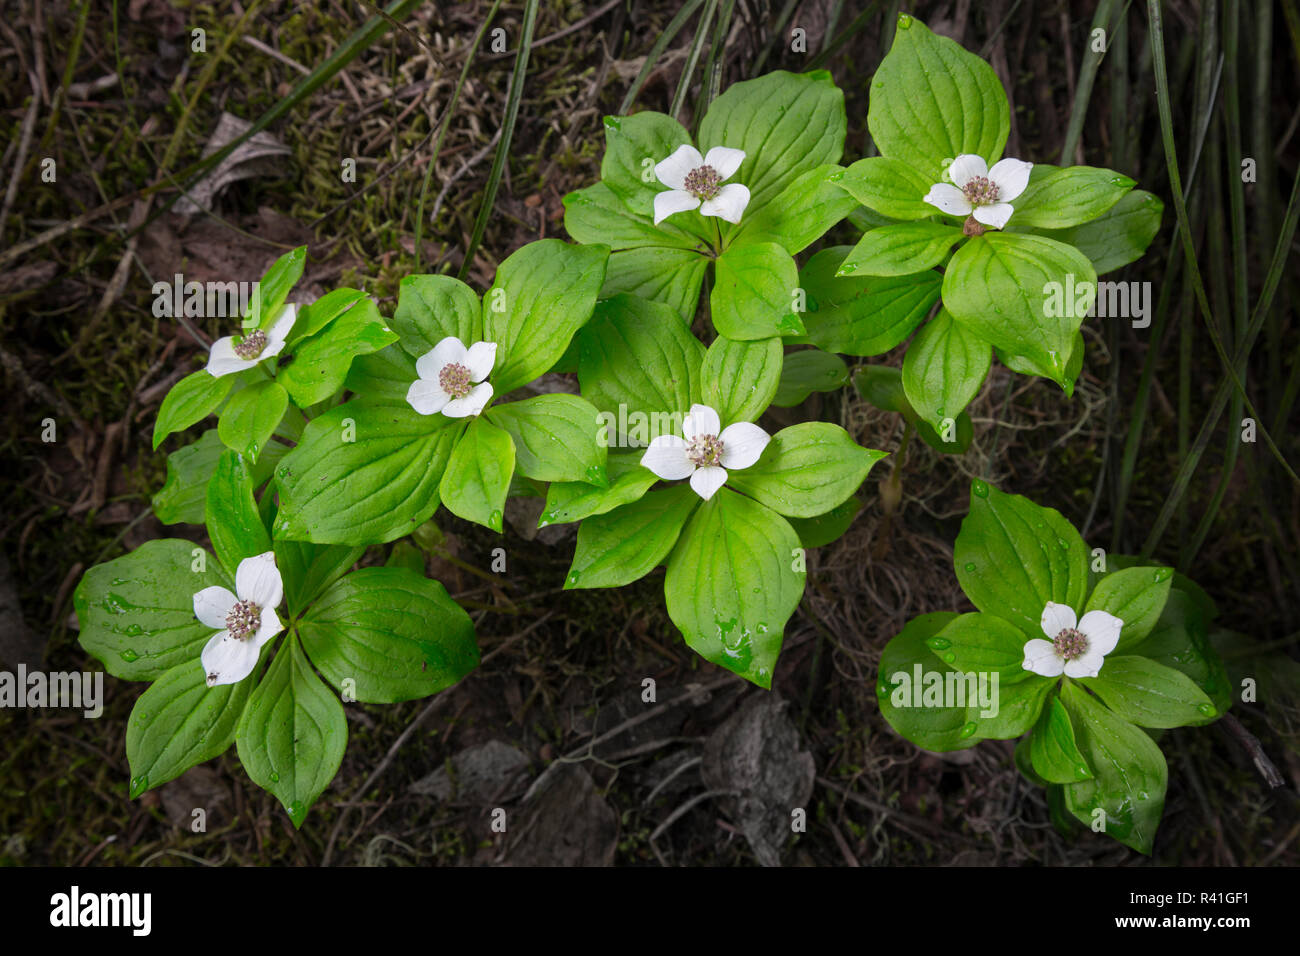 USA, Washington State. Bunchberry (Cornus canadensis), in dogwood family, a native wildflower in the Cascade mountains of Pacific Northwest. Stock Photo